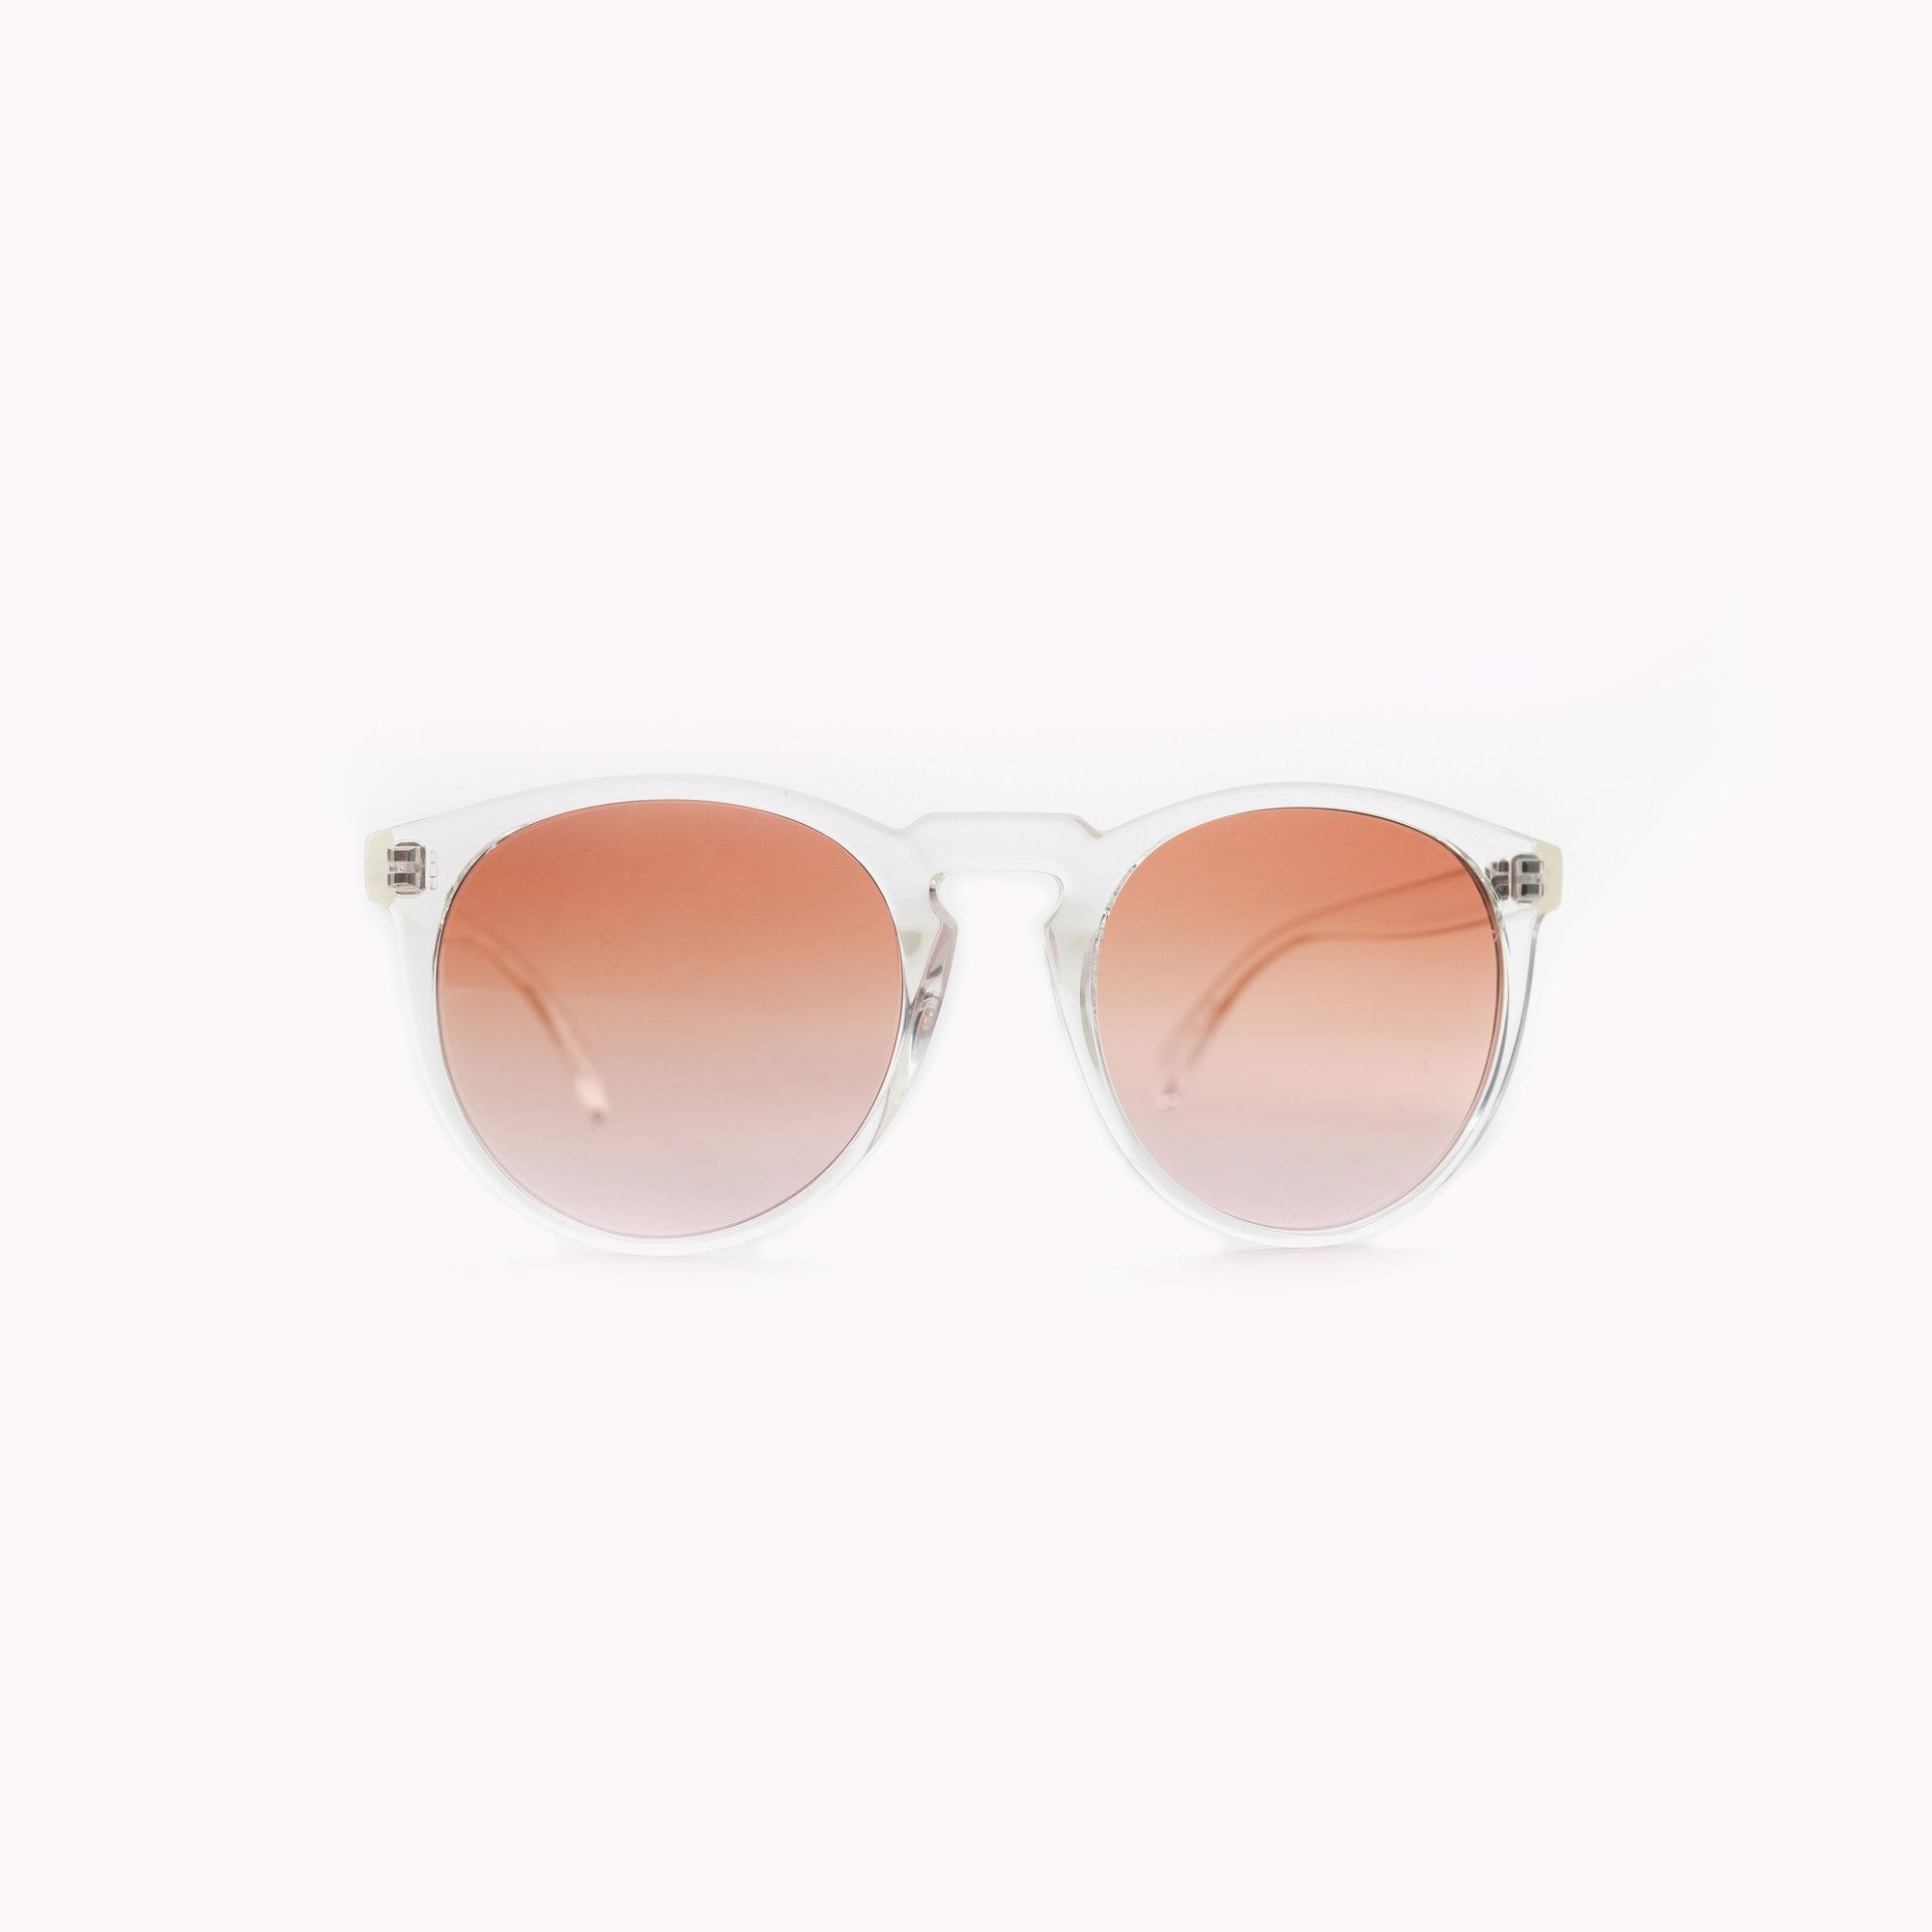 Italian crafted sunglasses with an oversized and clear frame